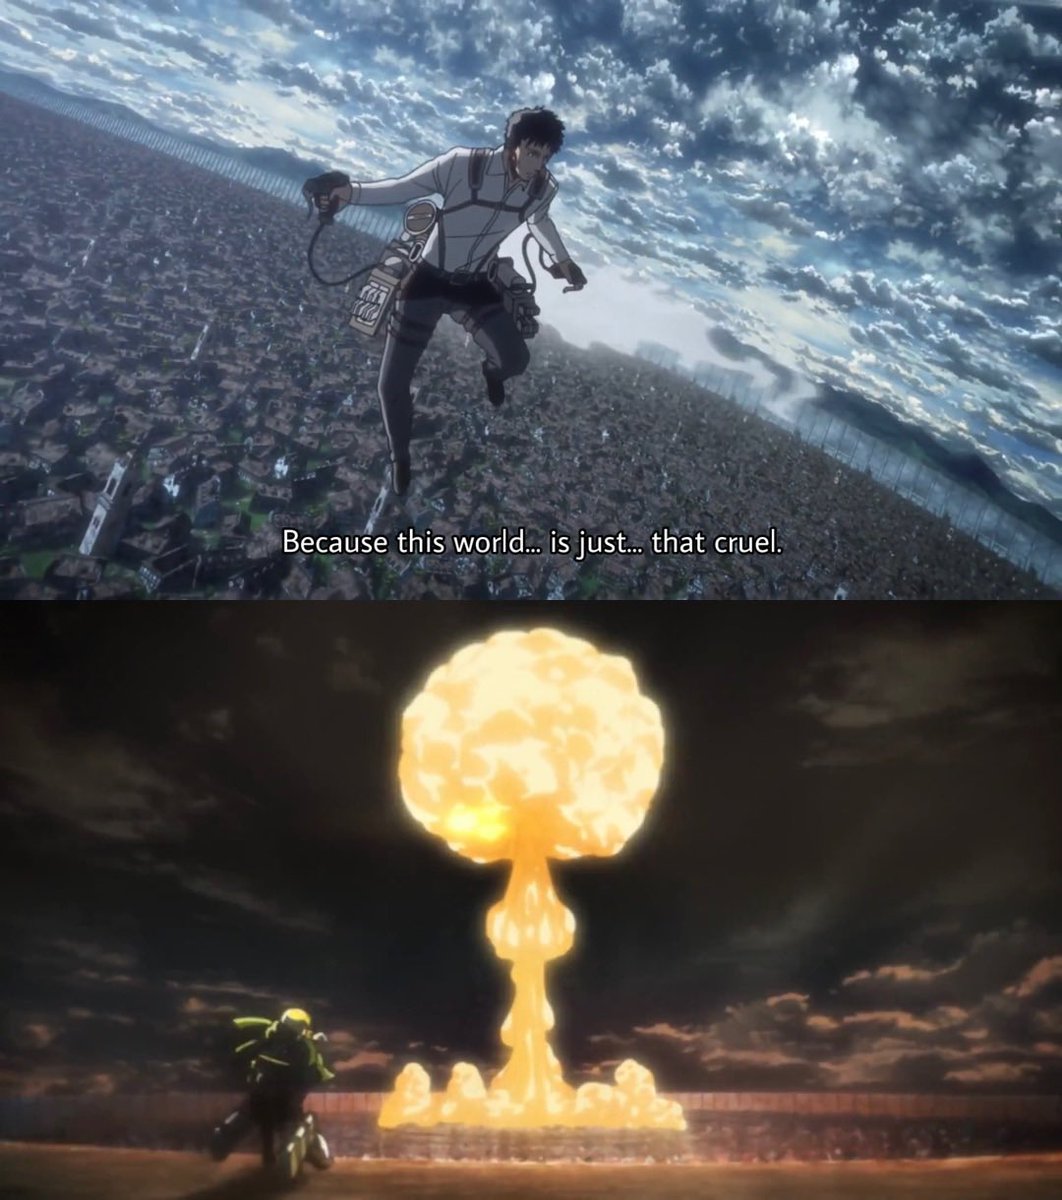 5 years ago today, Bertholdt’s nuclear transformation